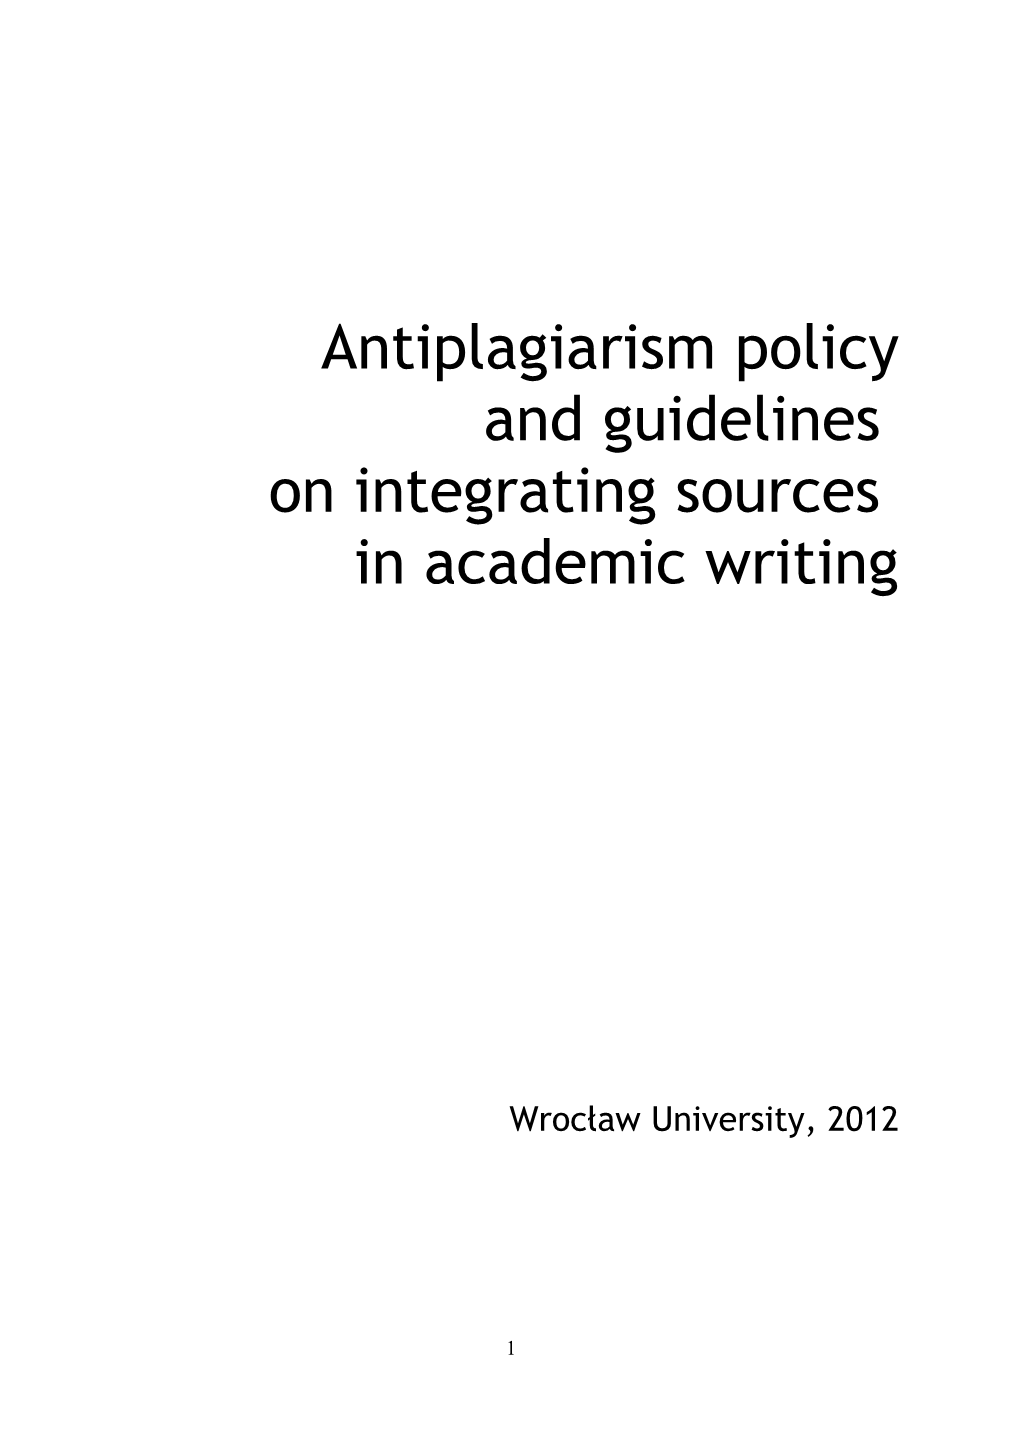 Academic Writing and Plagiarism